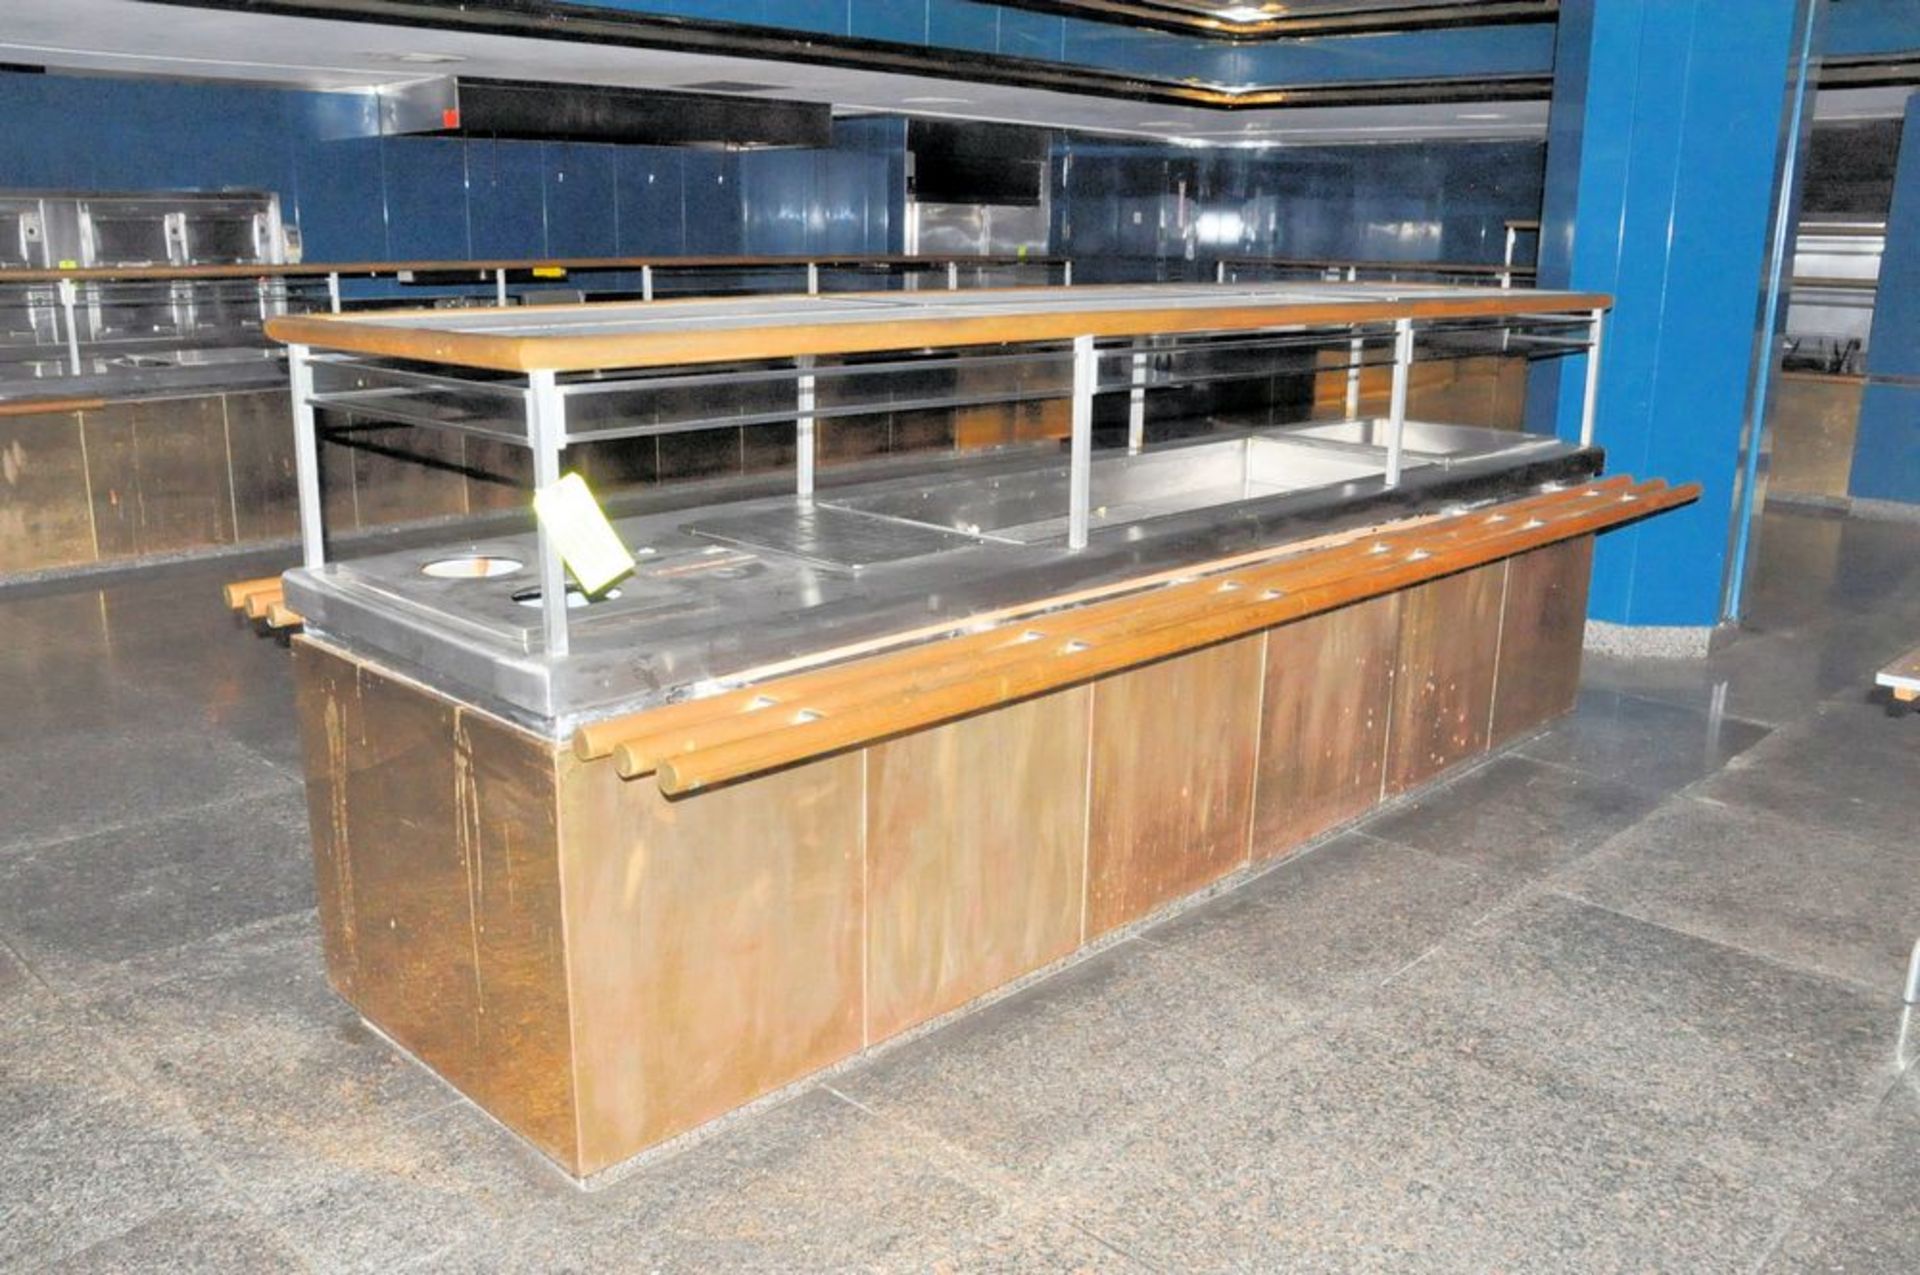 Stainless Steel Hot Foods Buffet Station, 3' x 12', Overhead Glass Sneeze Guard Hood - Image 3 of 8